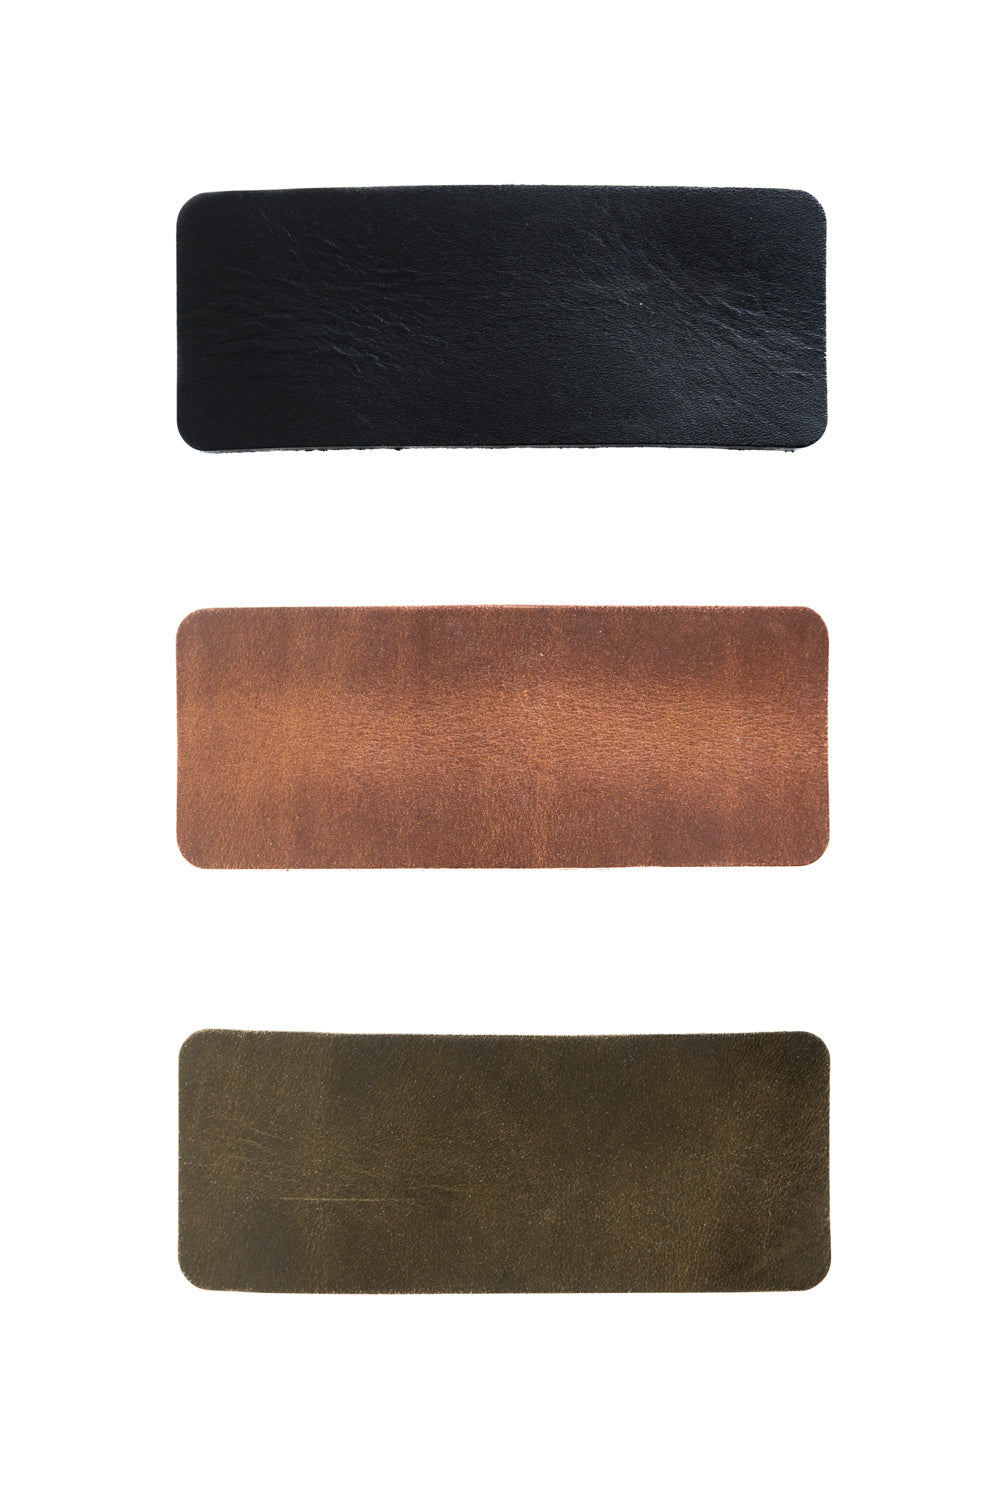 Sling Leather Options